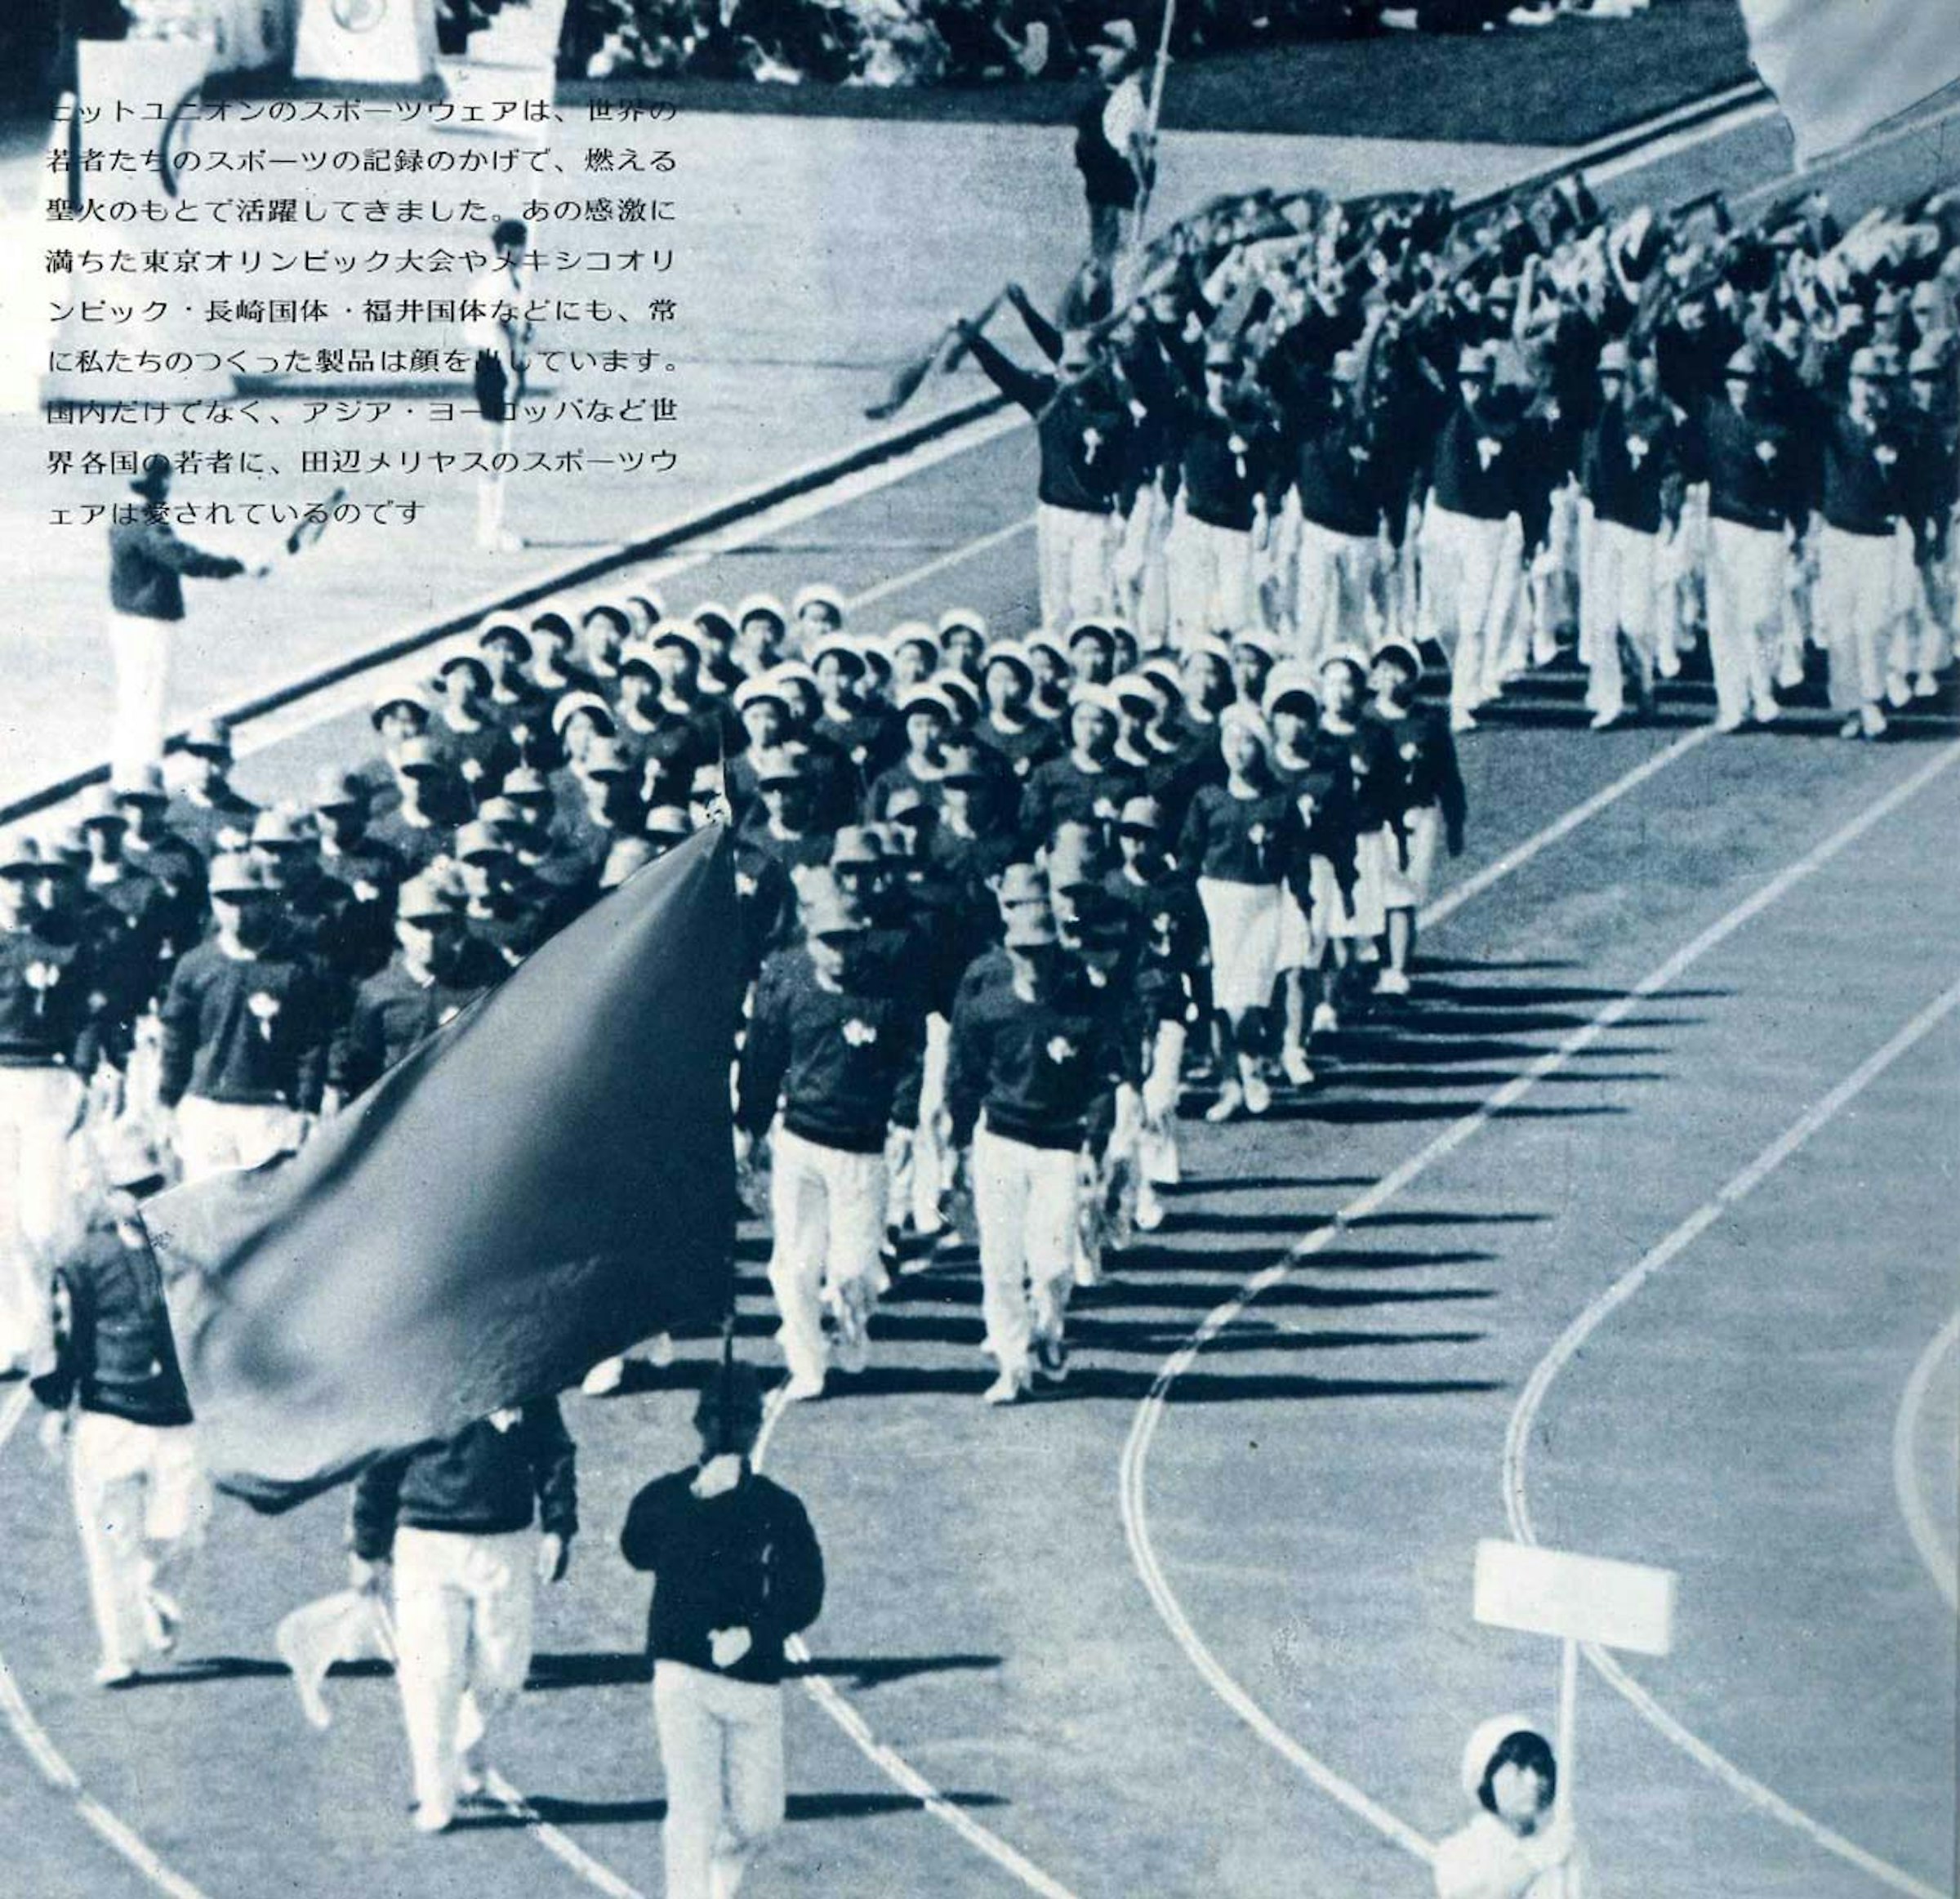 Documentation stored by Hit Union Co., Ltd. depicts the entry of the Japanese delegation during the 1964 Tokyo Games